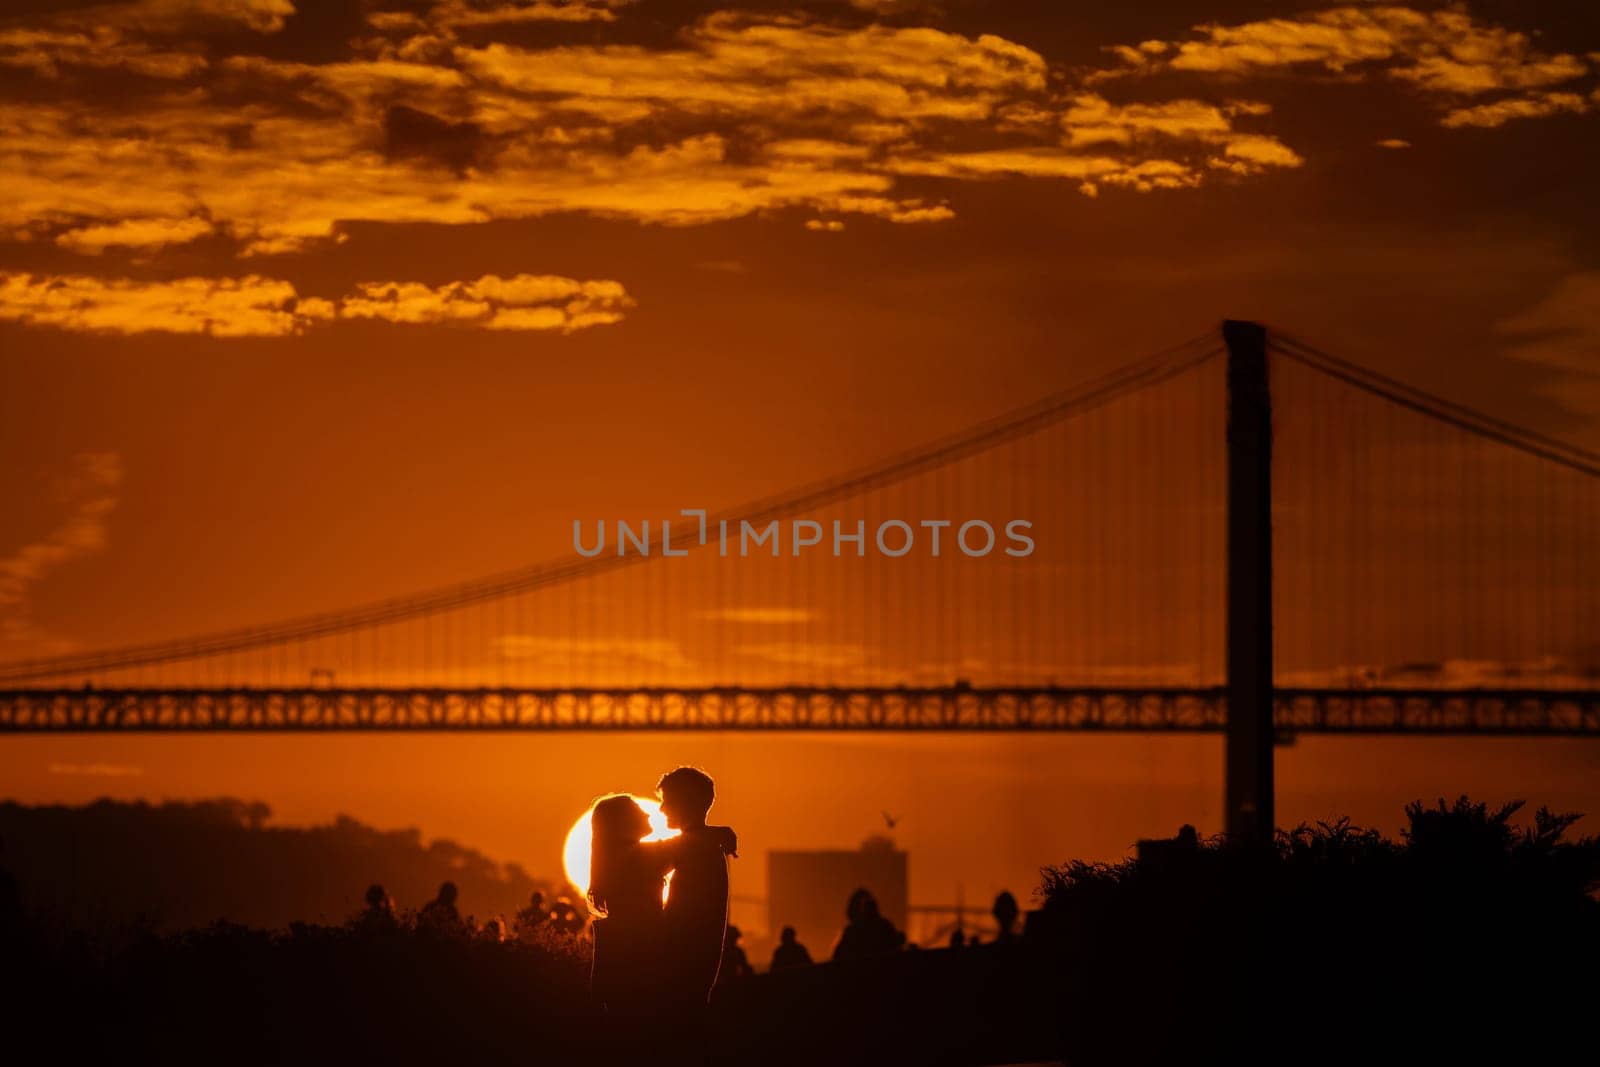 Sunset Romance: A Couple's Kiss by the Bridge at Dusk by Studia72